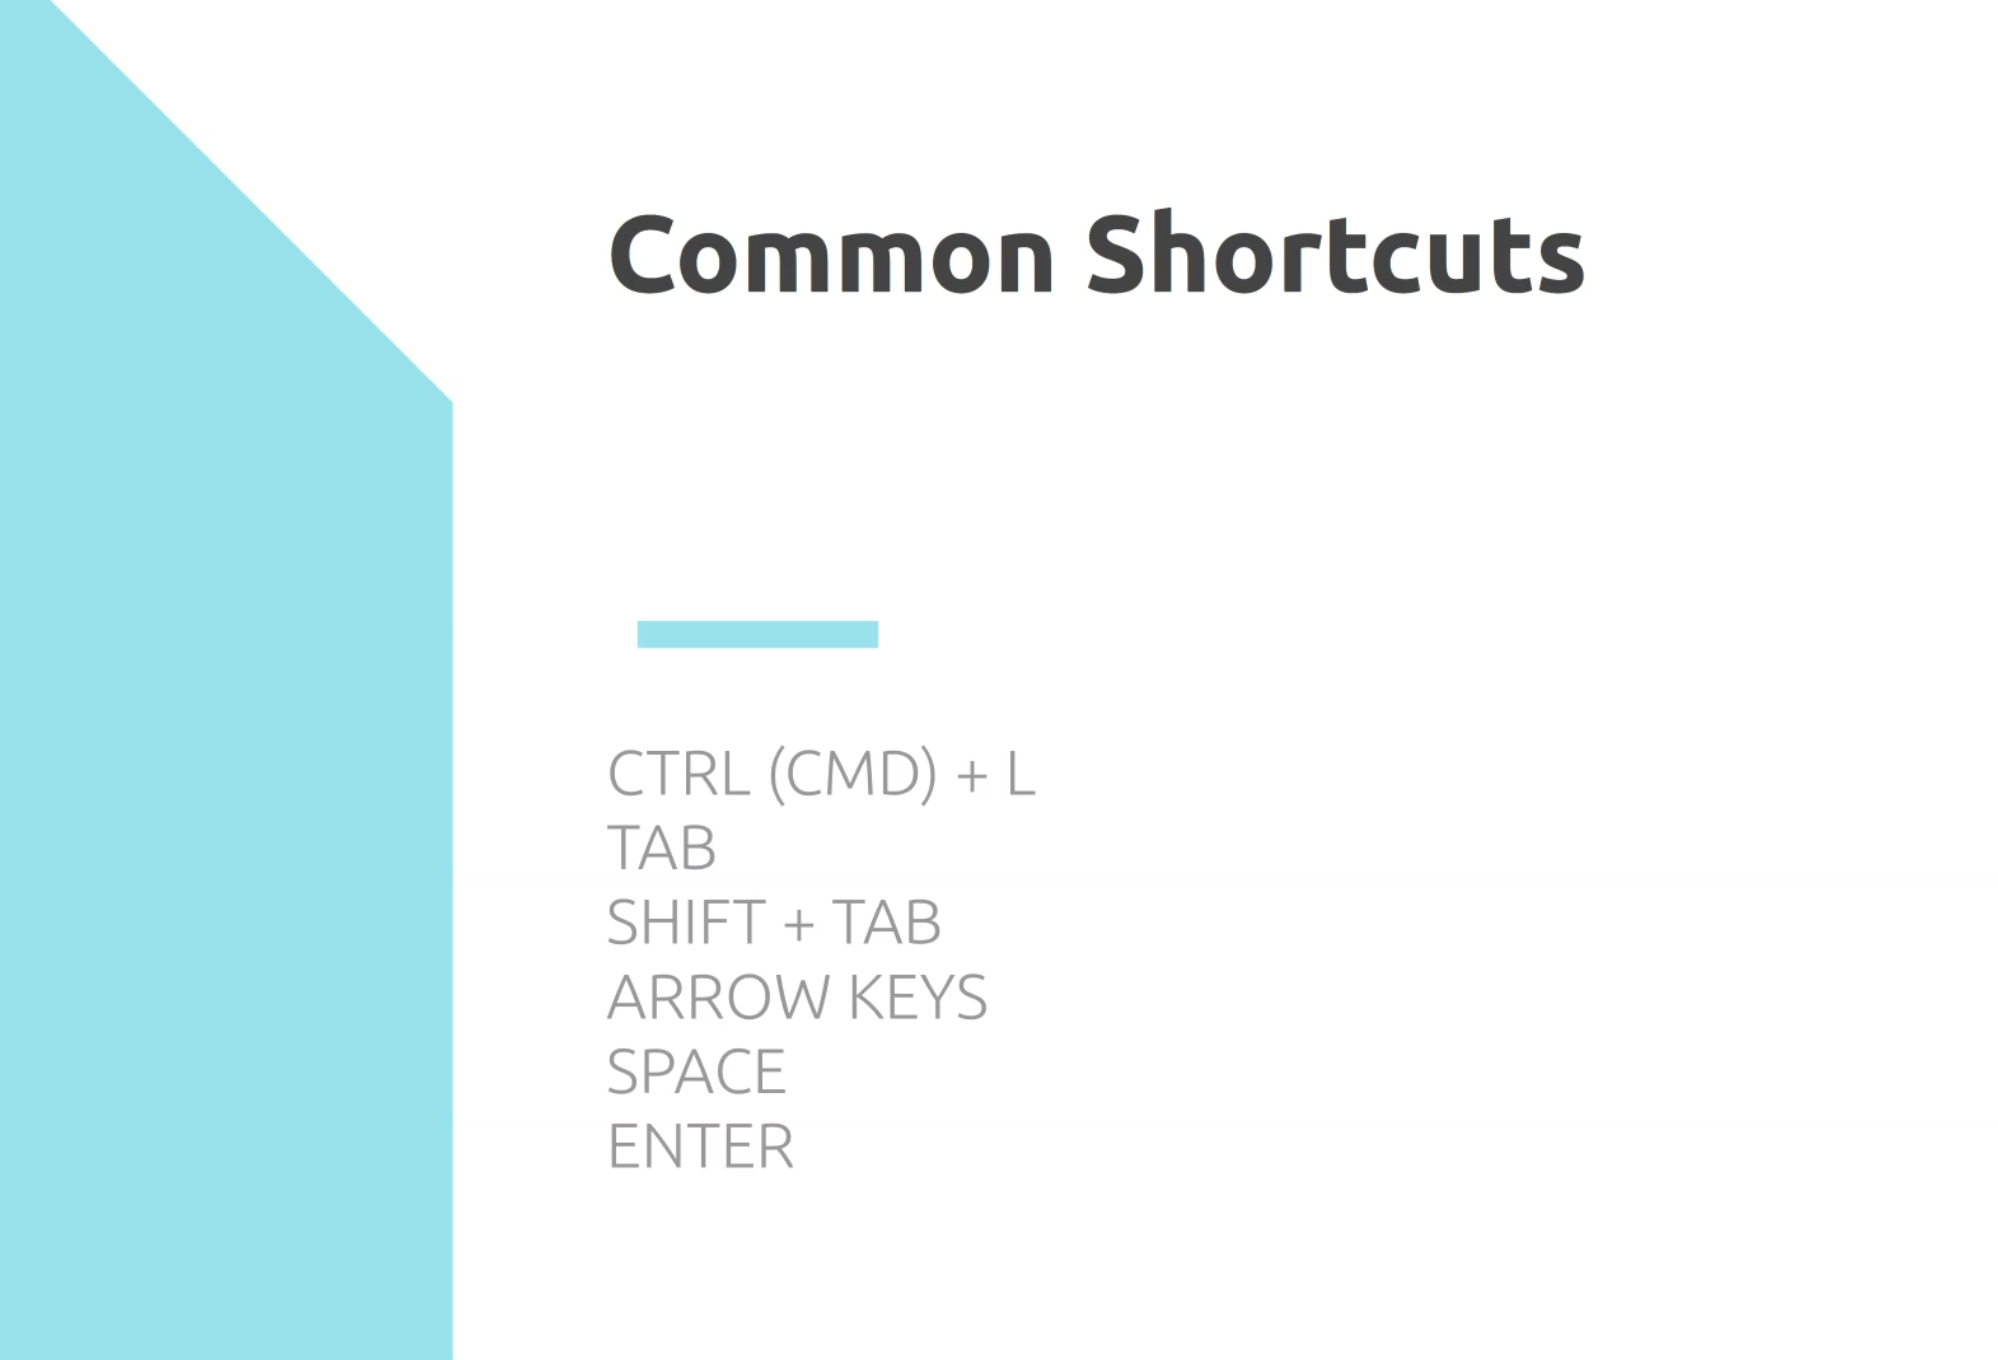 list of common shortcuts. explained below.